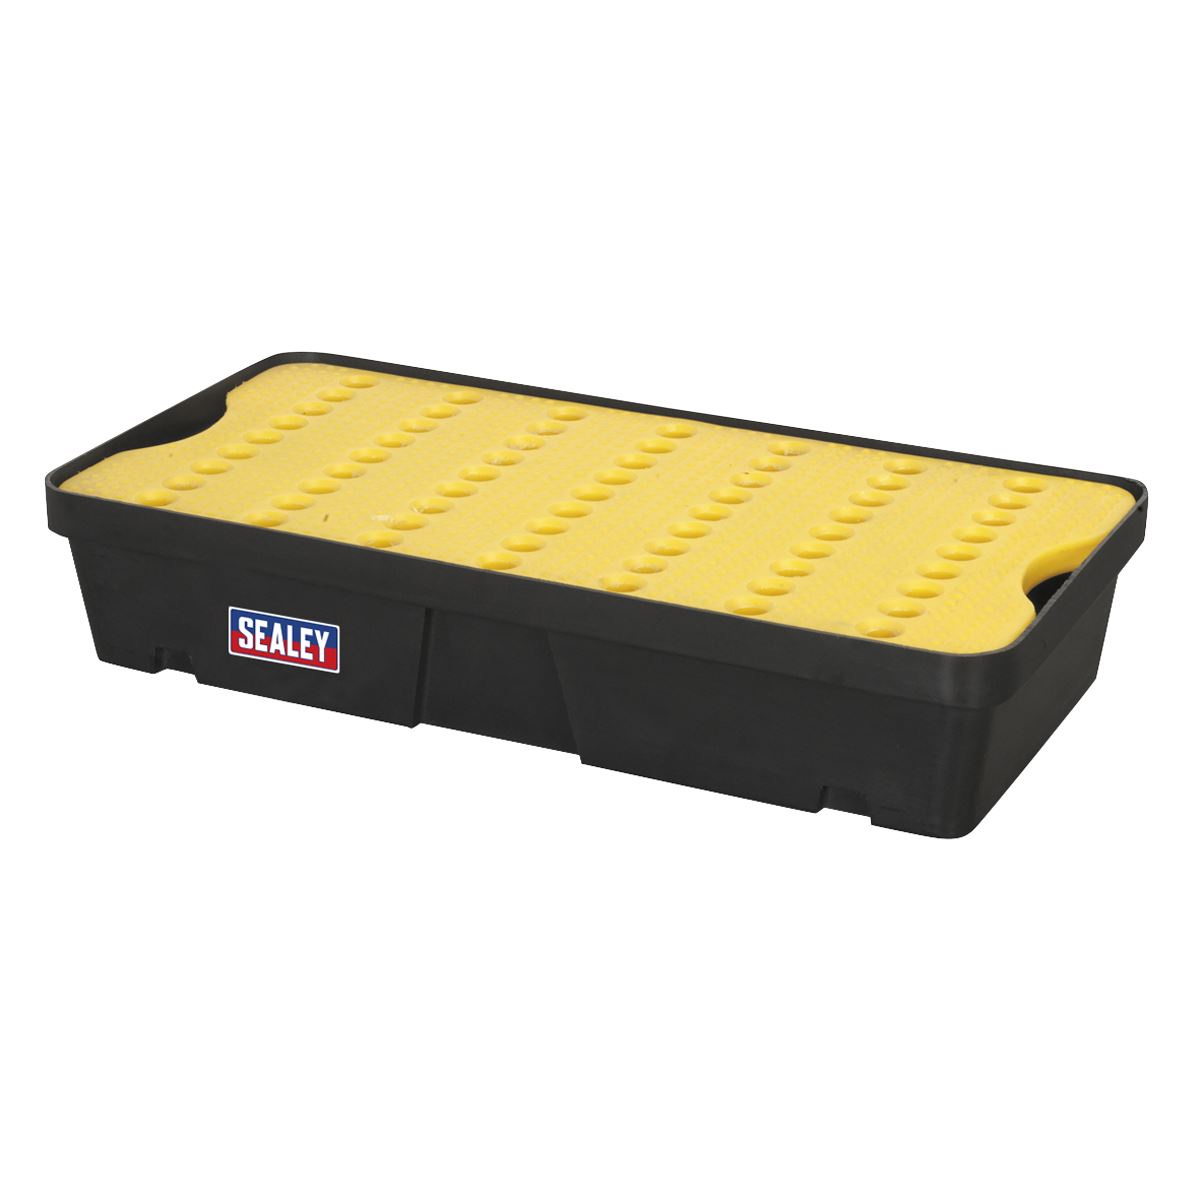 Sealey Spill Tray 30L with Platform